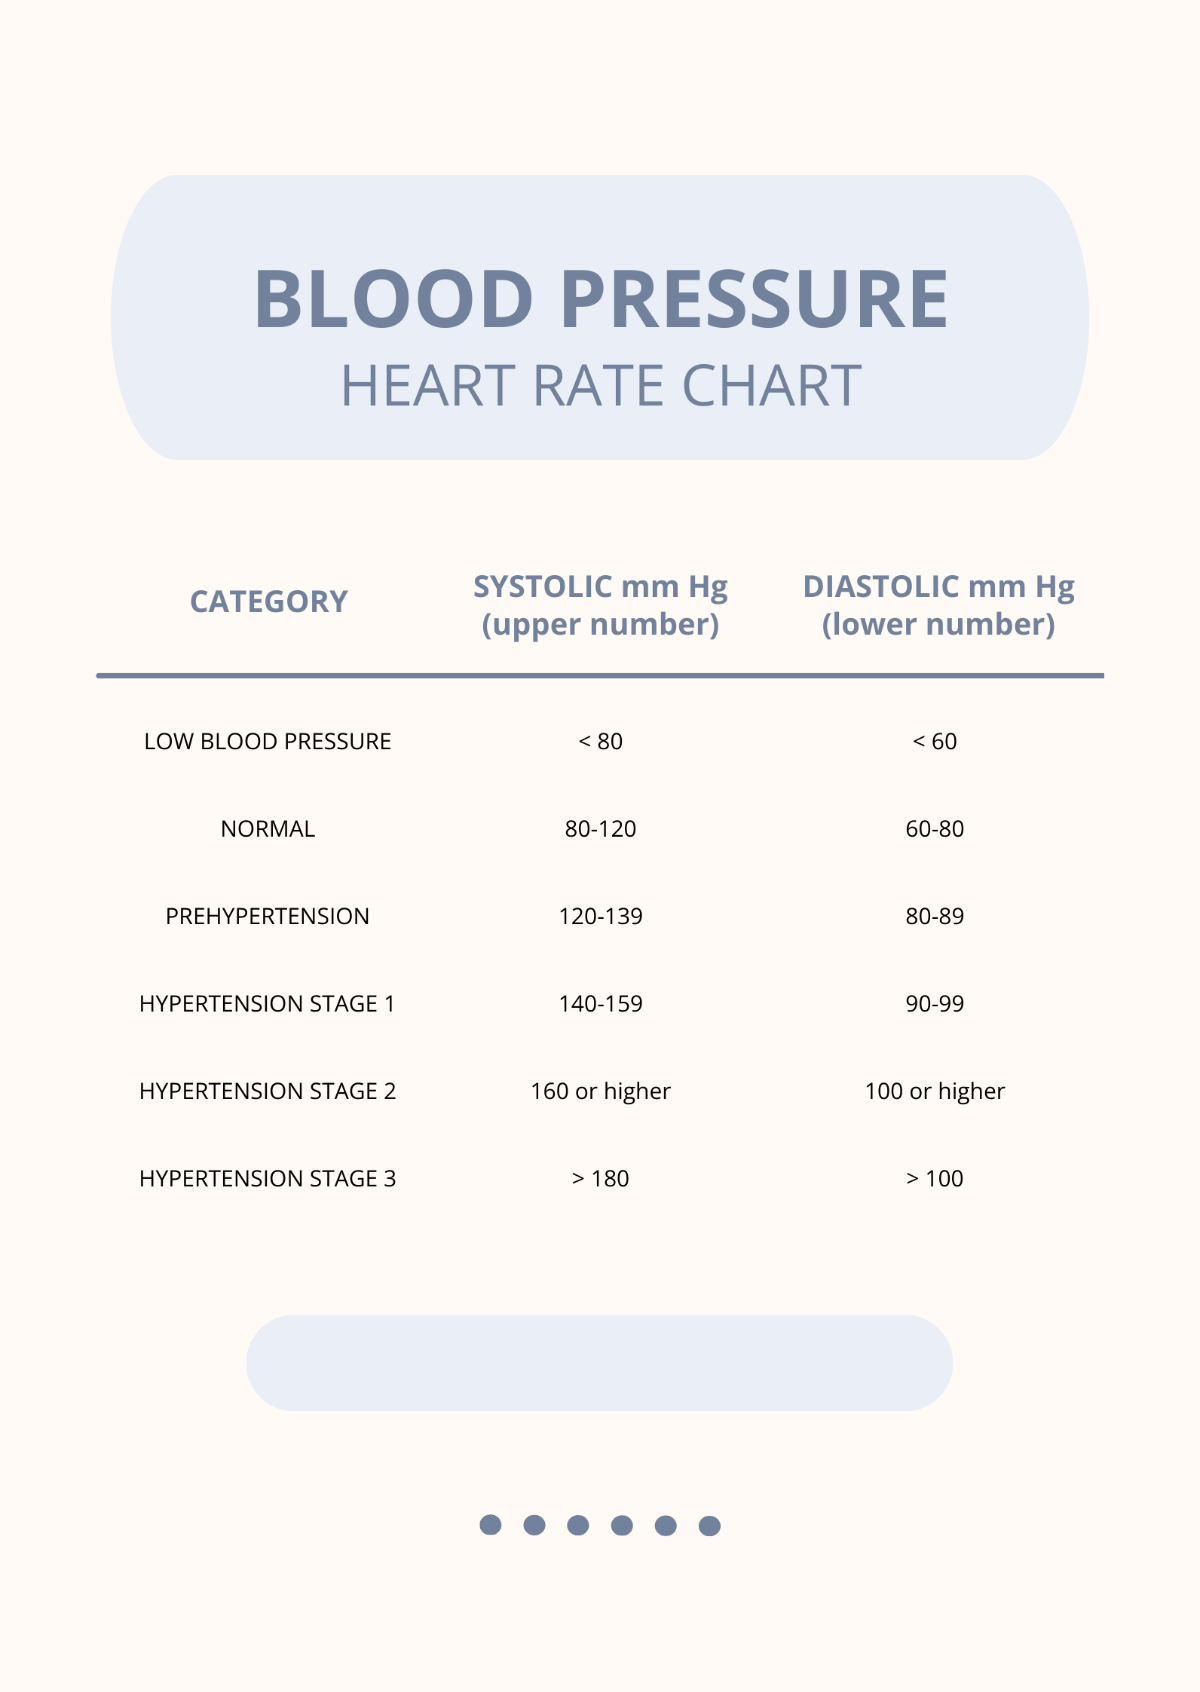 Blood Pressure Heart Rate Chart Template